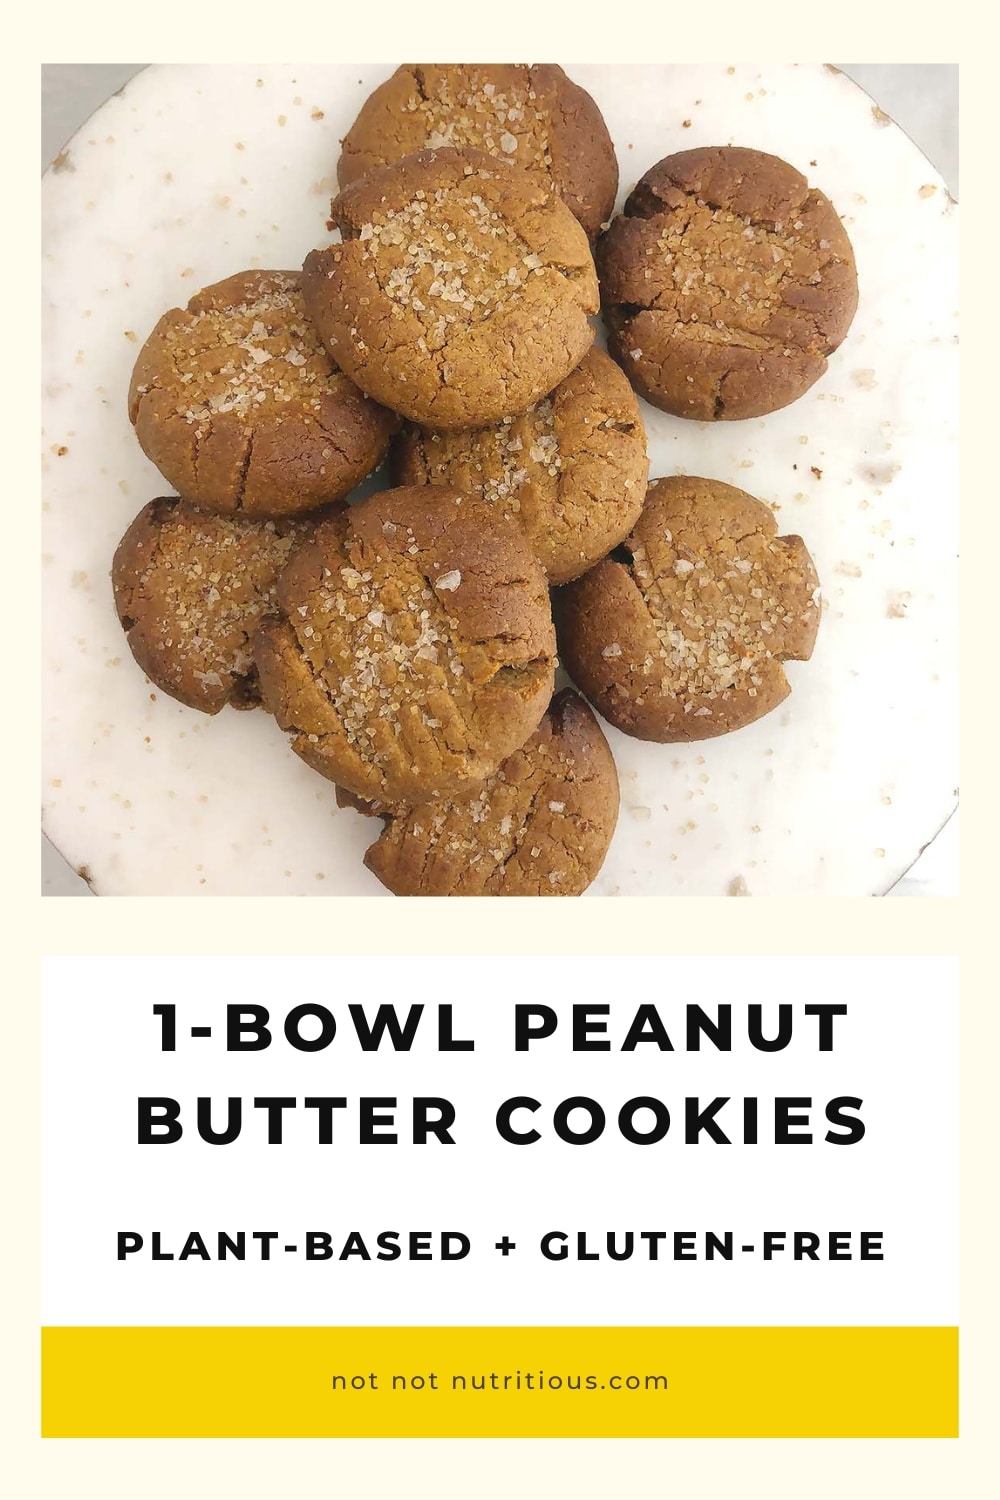 Pin for 1-Bowl Peanut Butter Cookies, plant-based and gluten-free